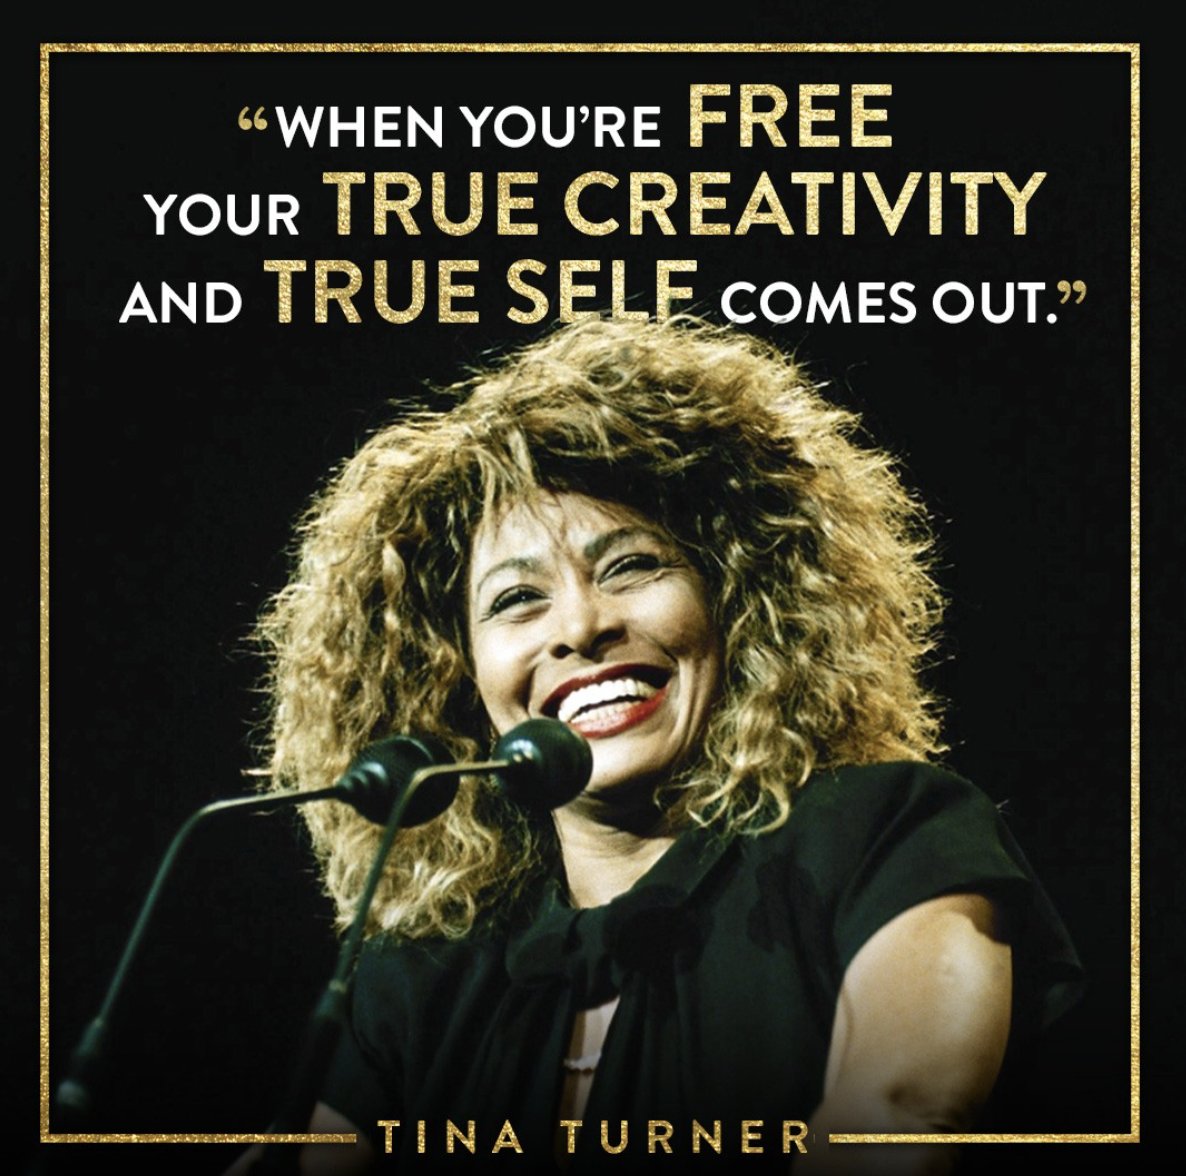 Tina embodied what it truly means to be free 💛 #TinaTurner